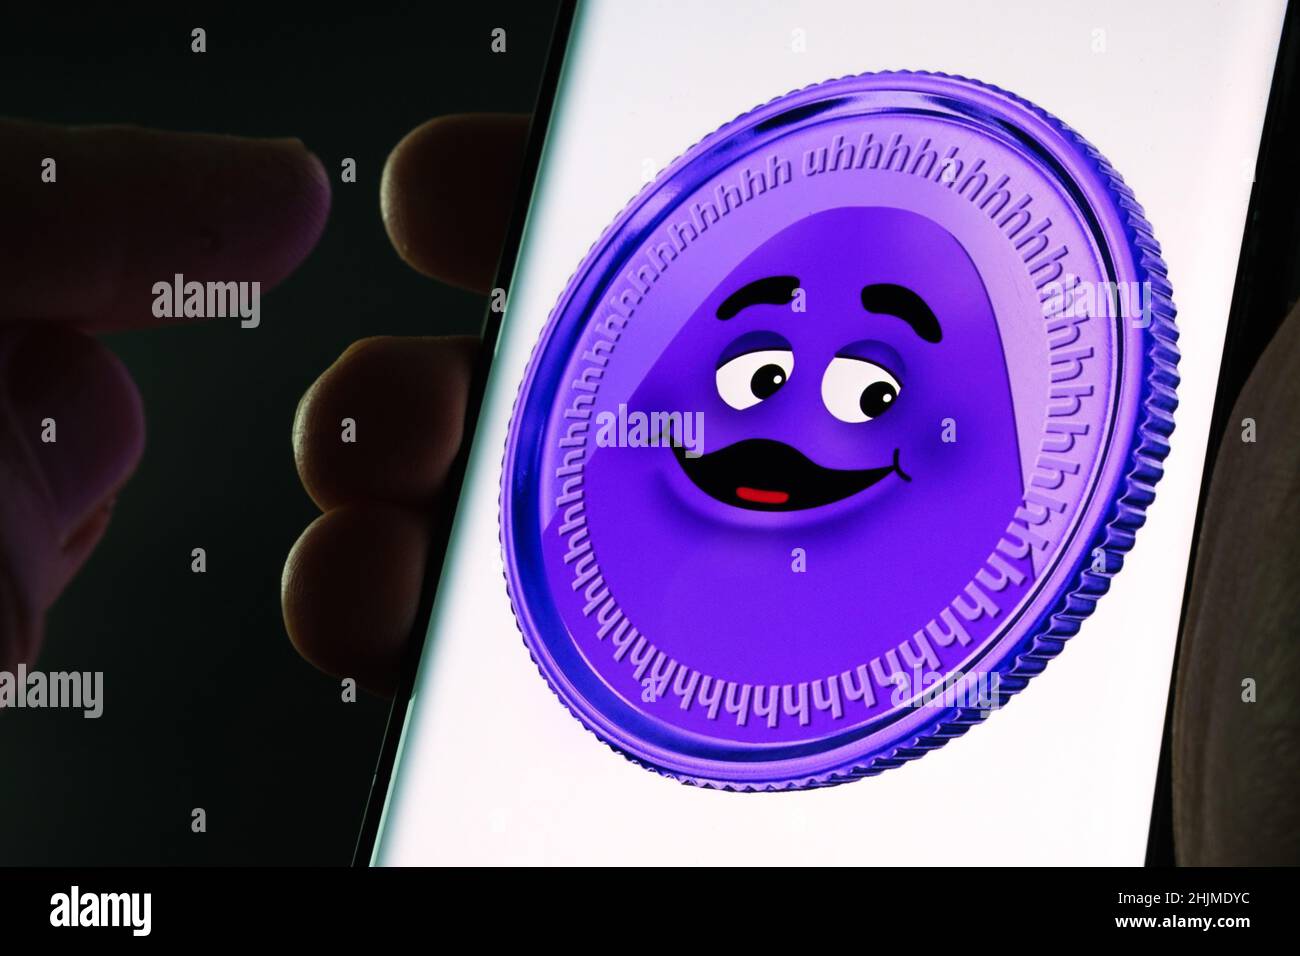 McDonald's Grimace Coin seen on smartphone screen hold in hands. Fake meme coin. Stafford, United Kingdom, January 30, 2022. Stock Photo